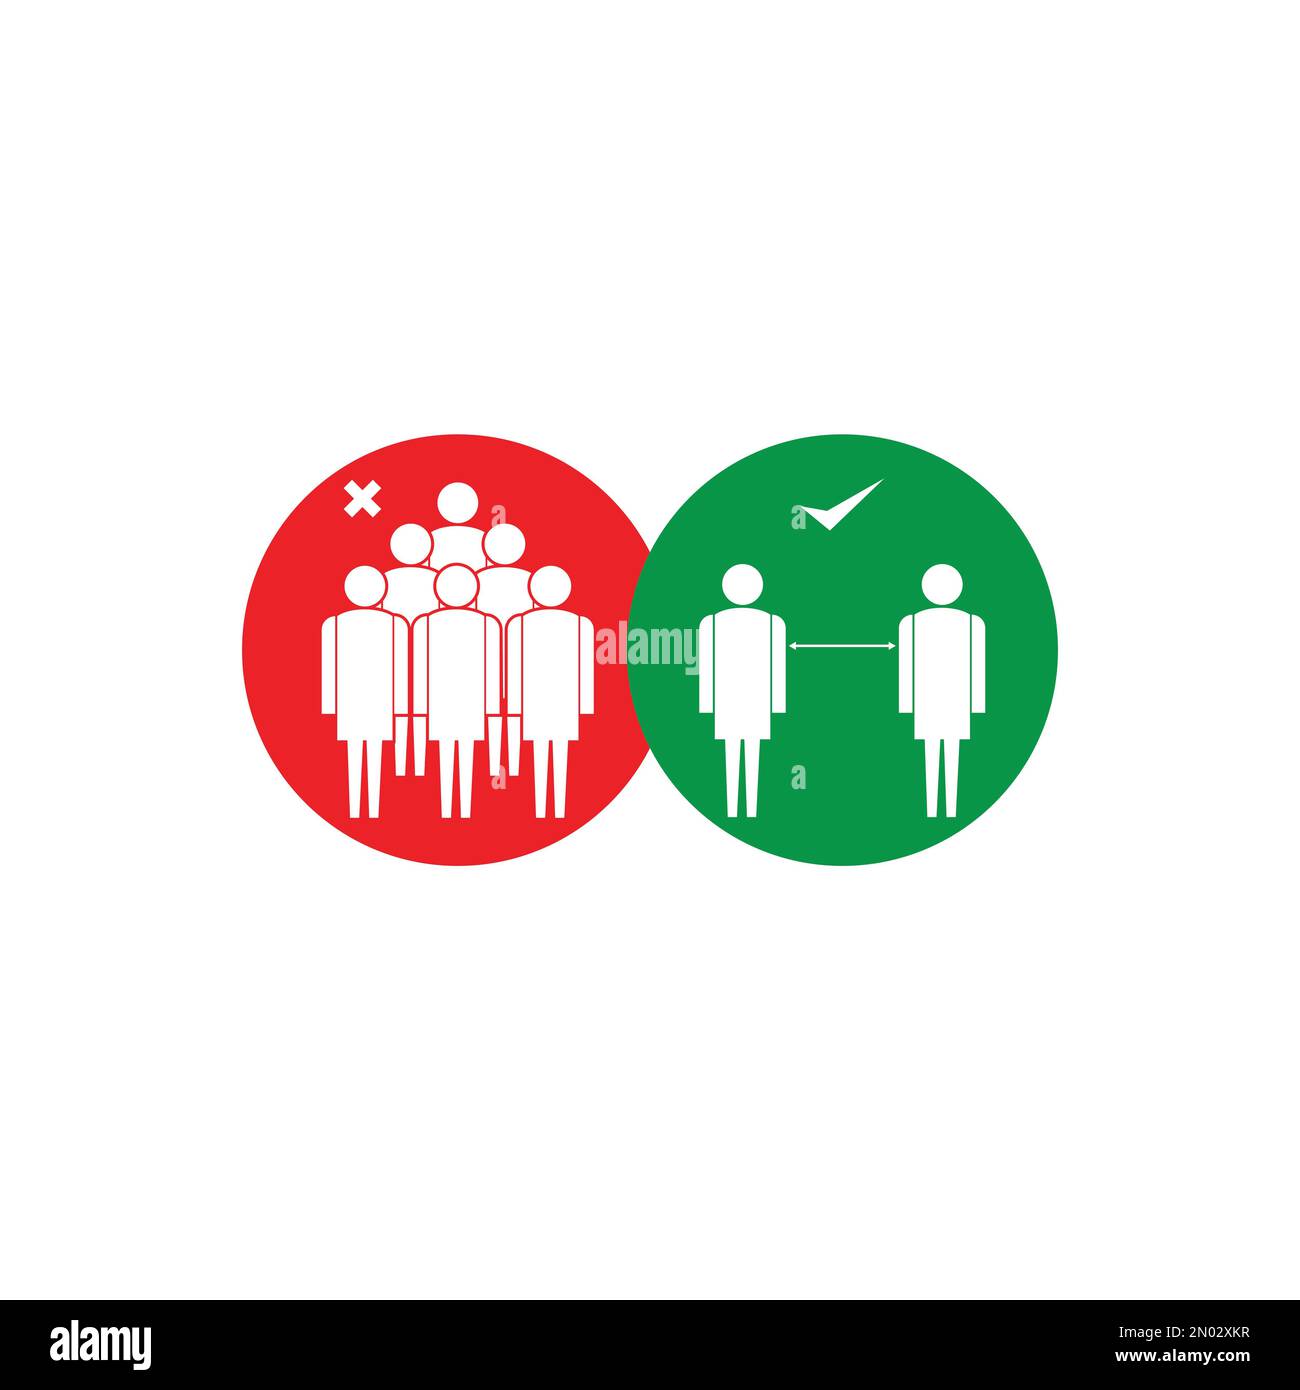 Illustration Social distancing, keep distance in public society people to protect from COVID-19 coronavirus outbreak spreading concept. Stock Vector